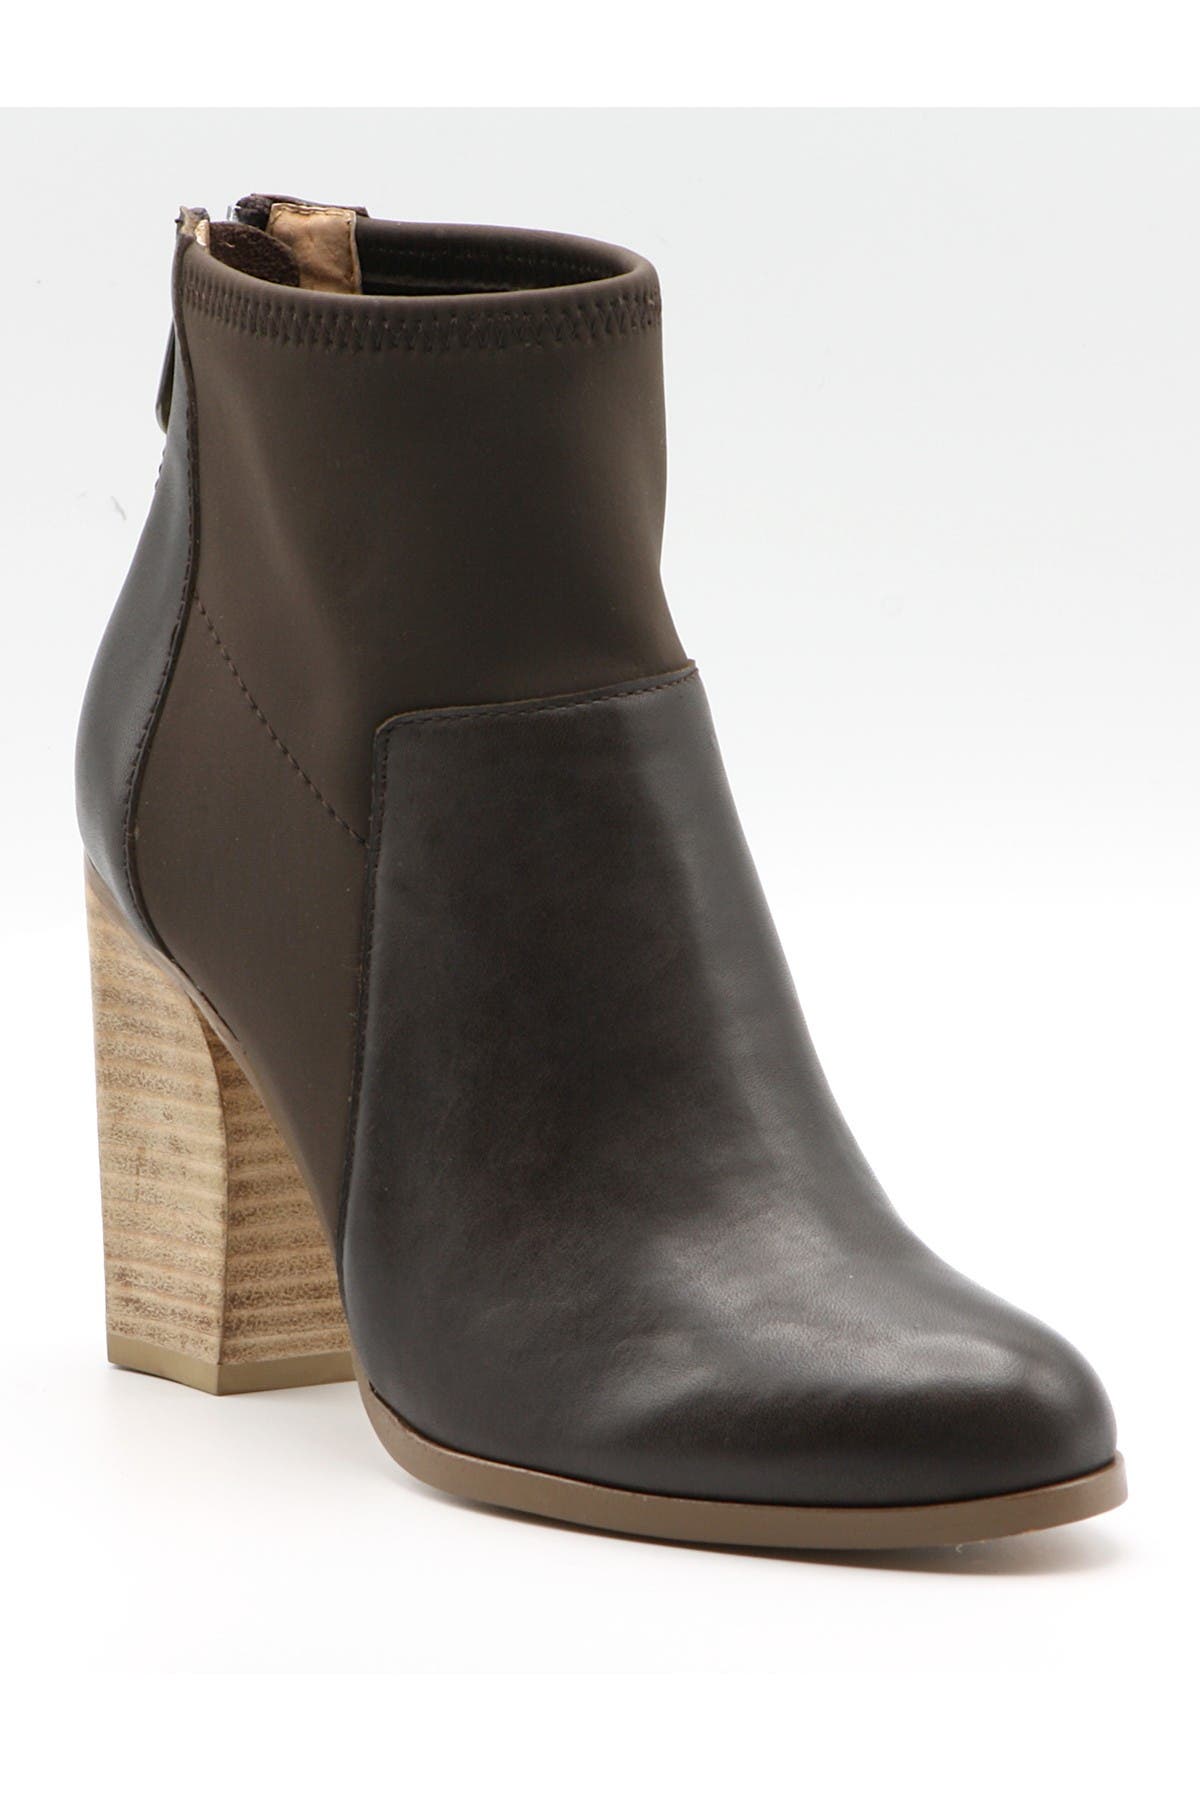 nordstrom rack boots and booties